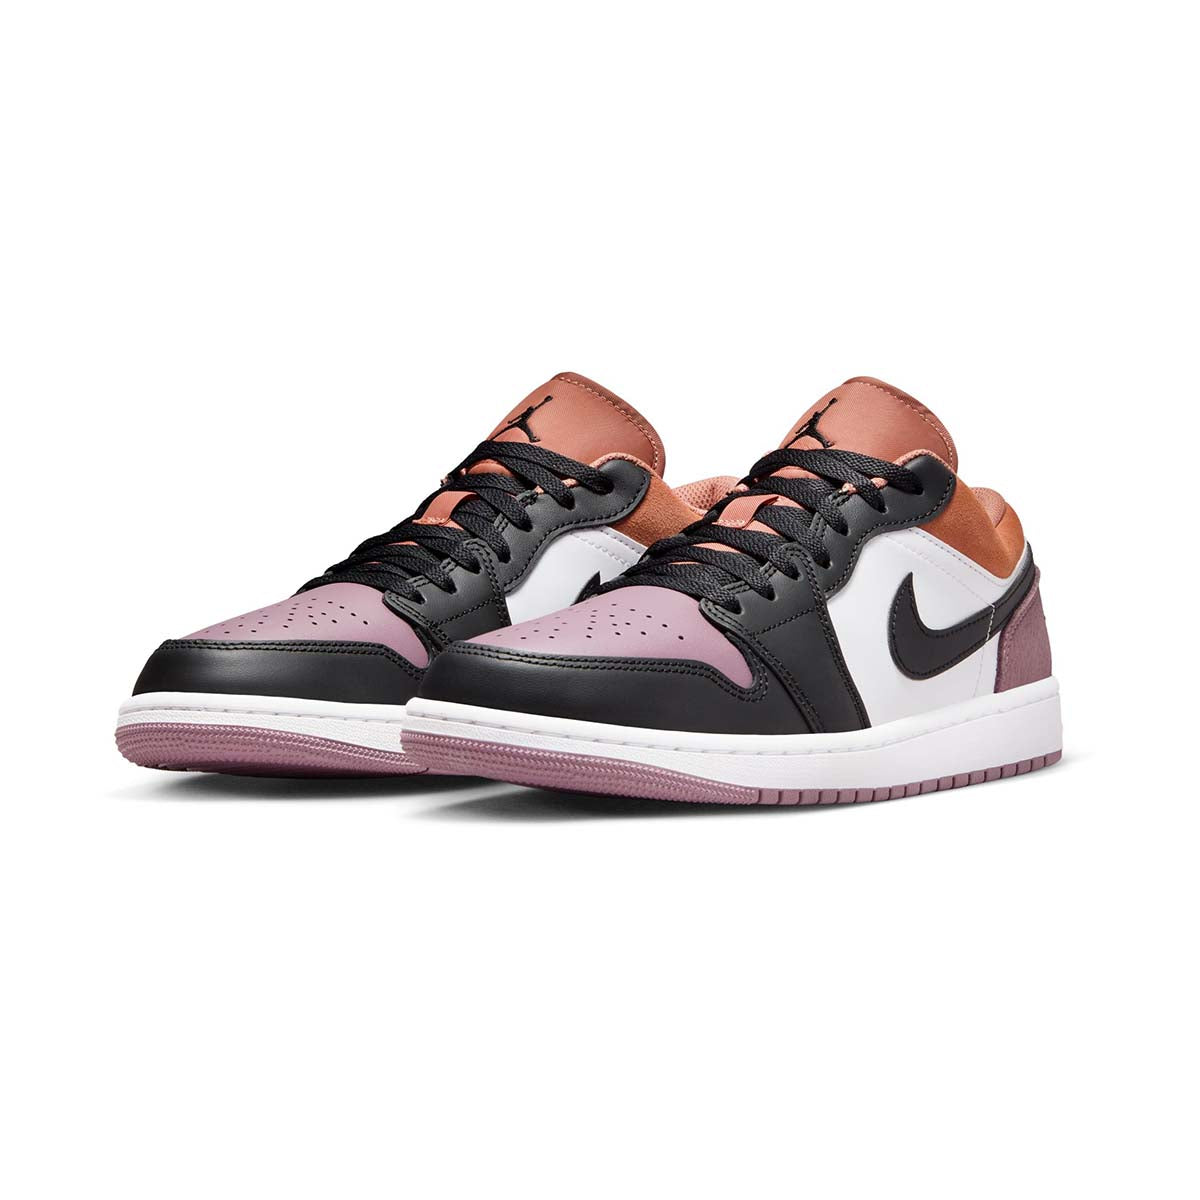 everything you need to try katie forrests air jordan 1 pink quartz makeup look Men's Shoes